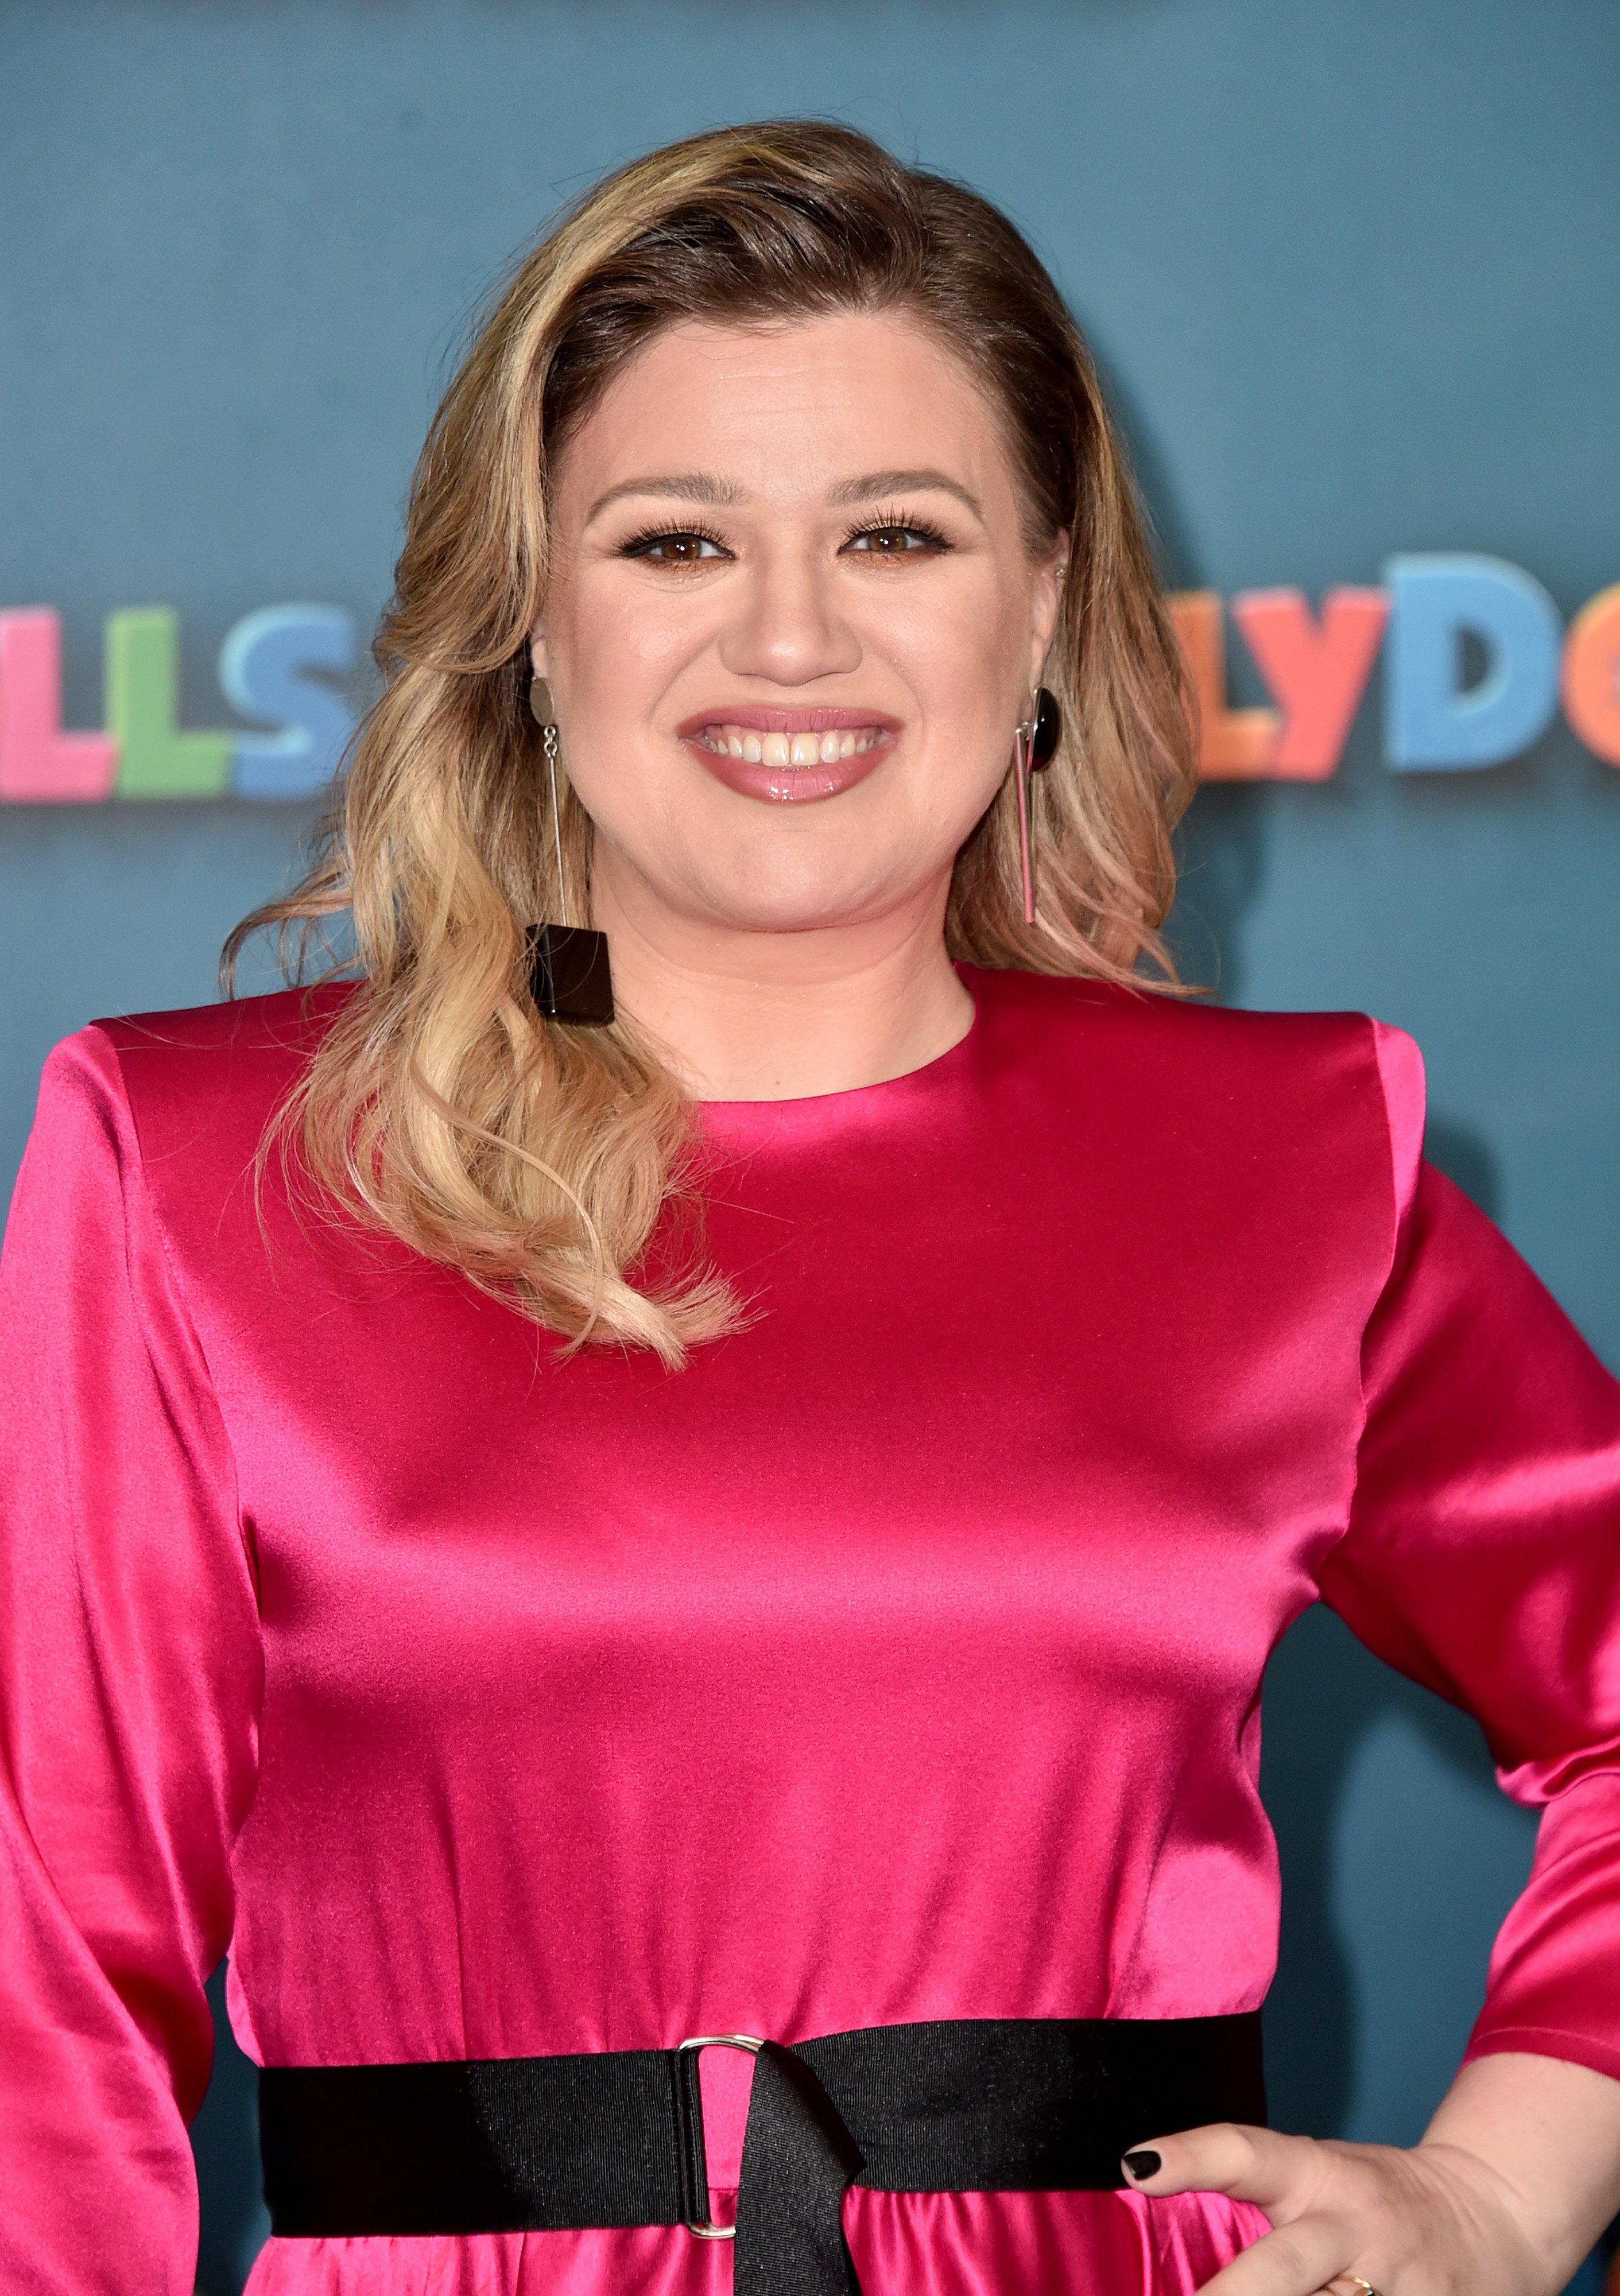 Kelly Clarkson in California in 2019 | Source: Getty Images